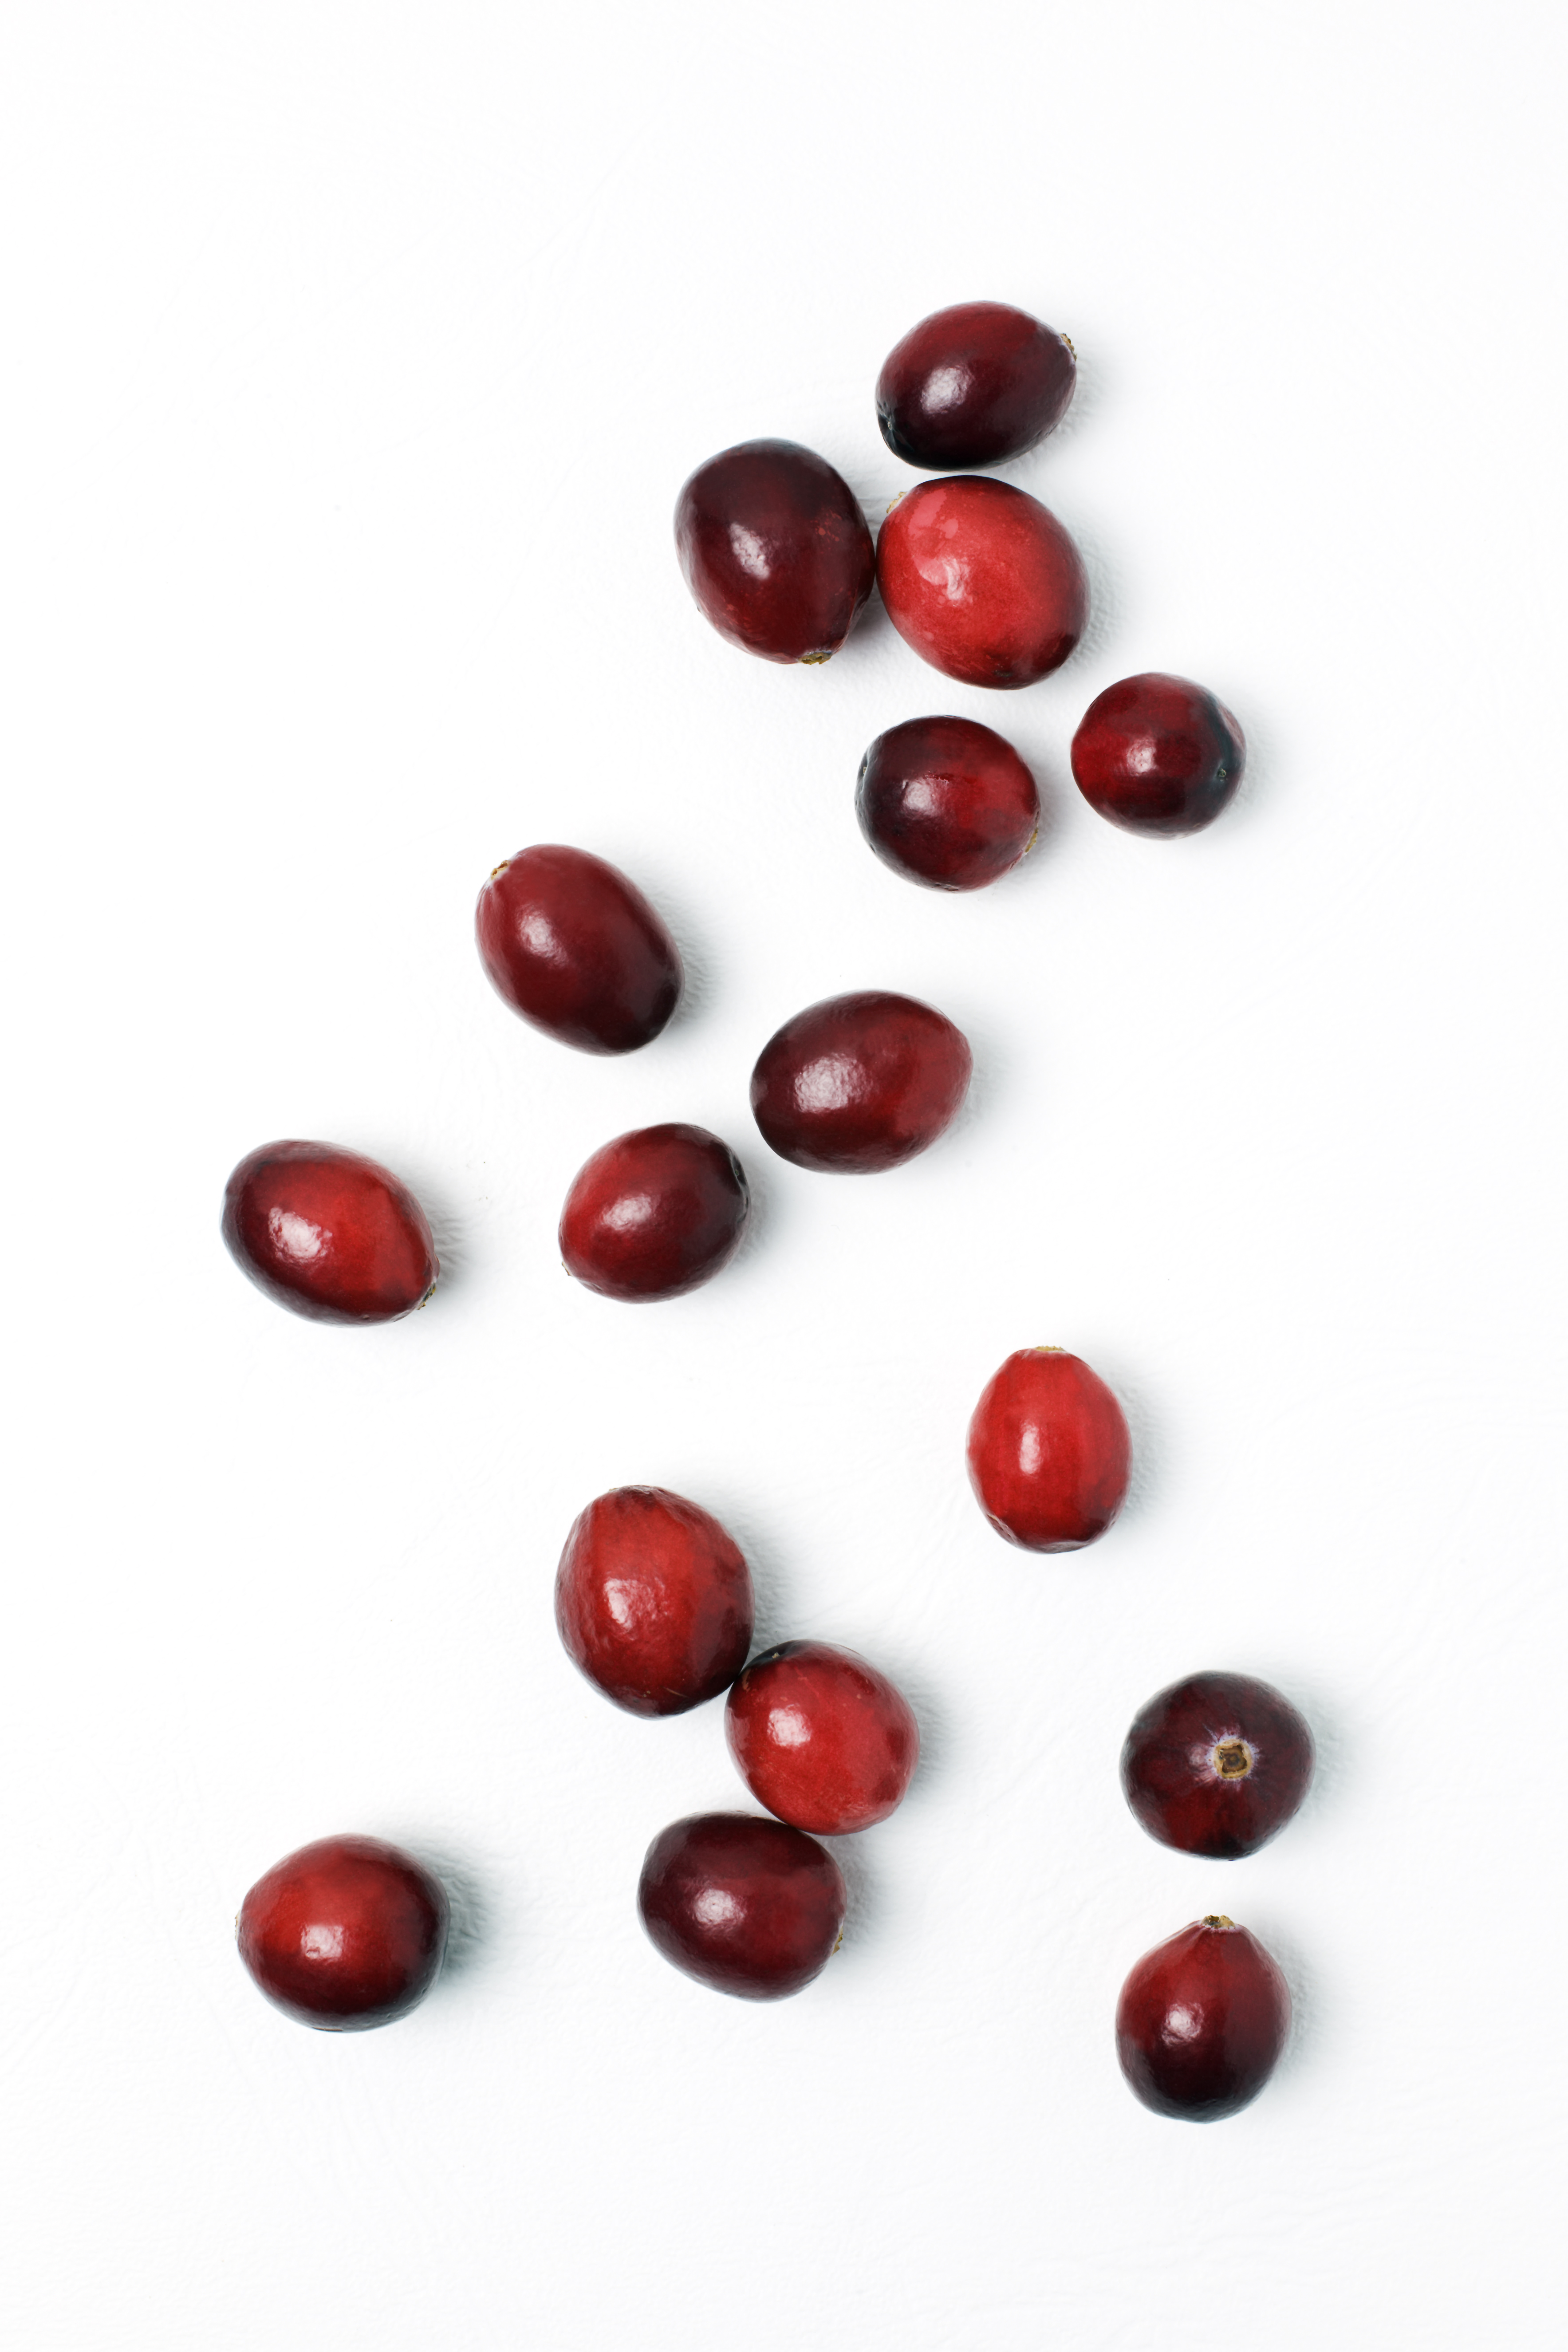 Cranberries against white background